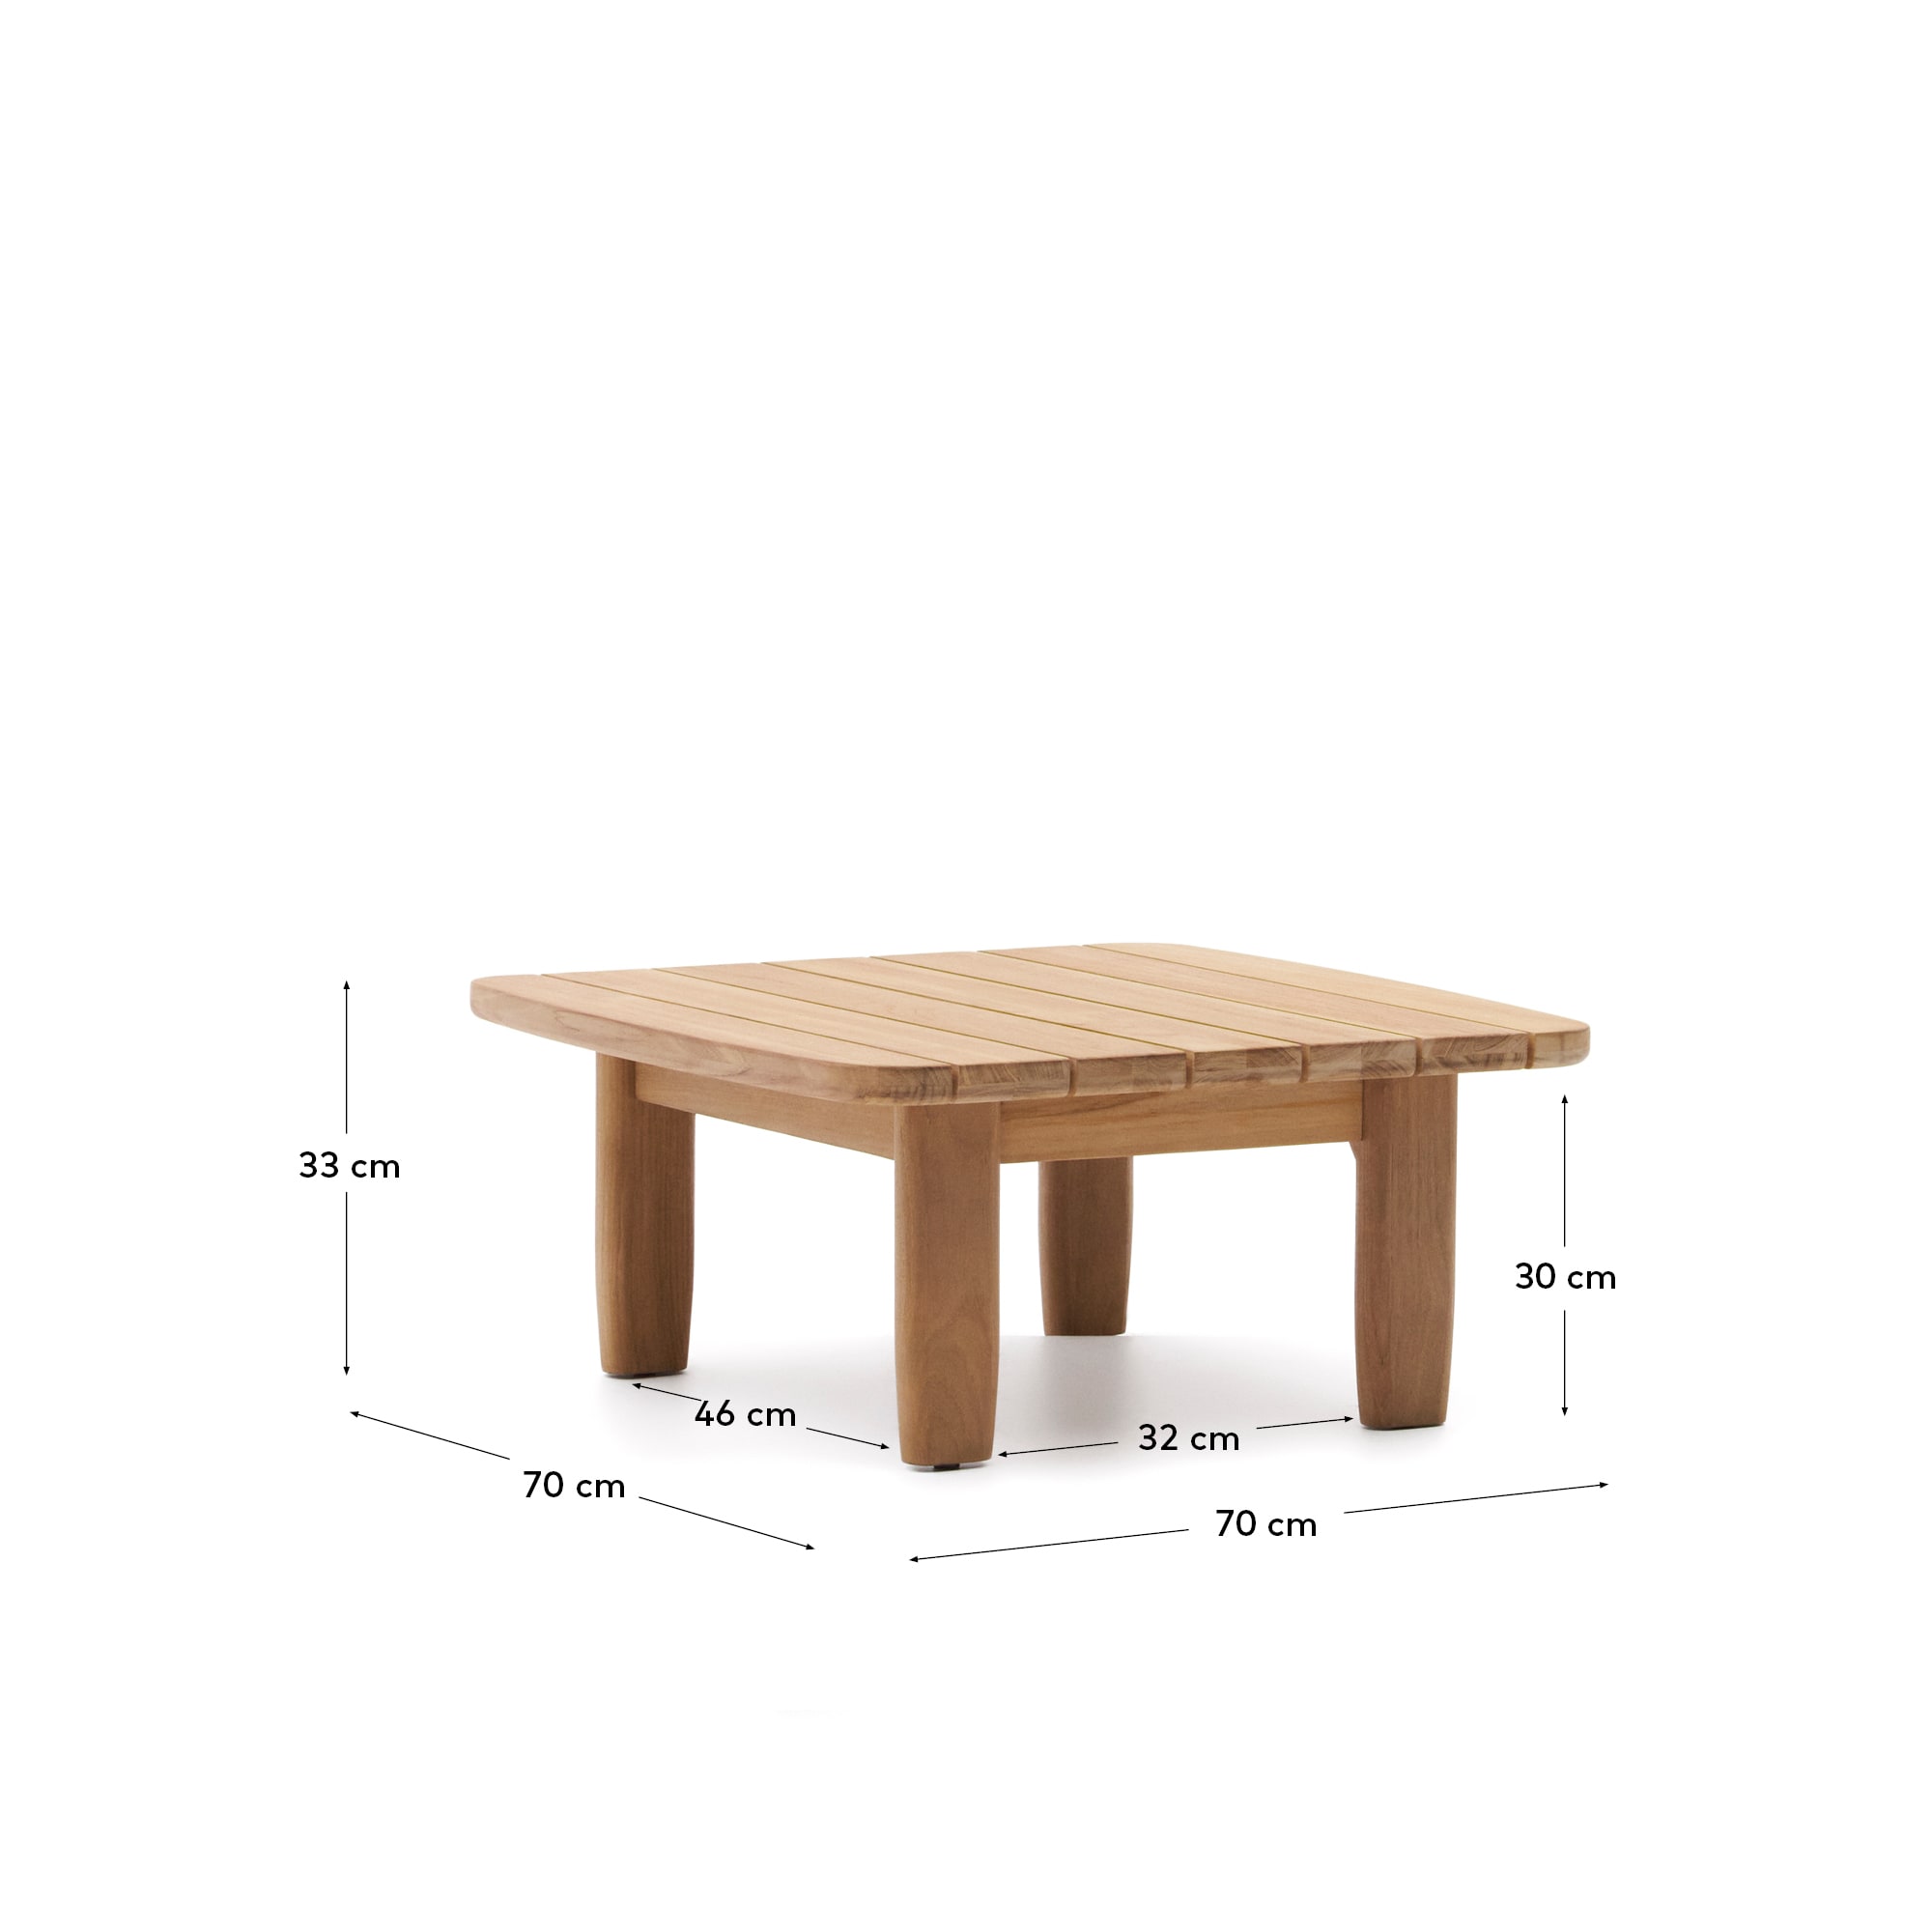 Tirant side table made from solid teak wood 100% FSC - sizes